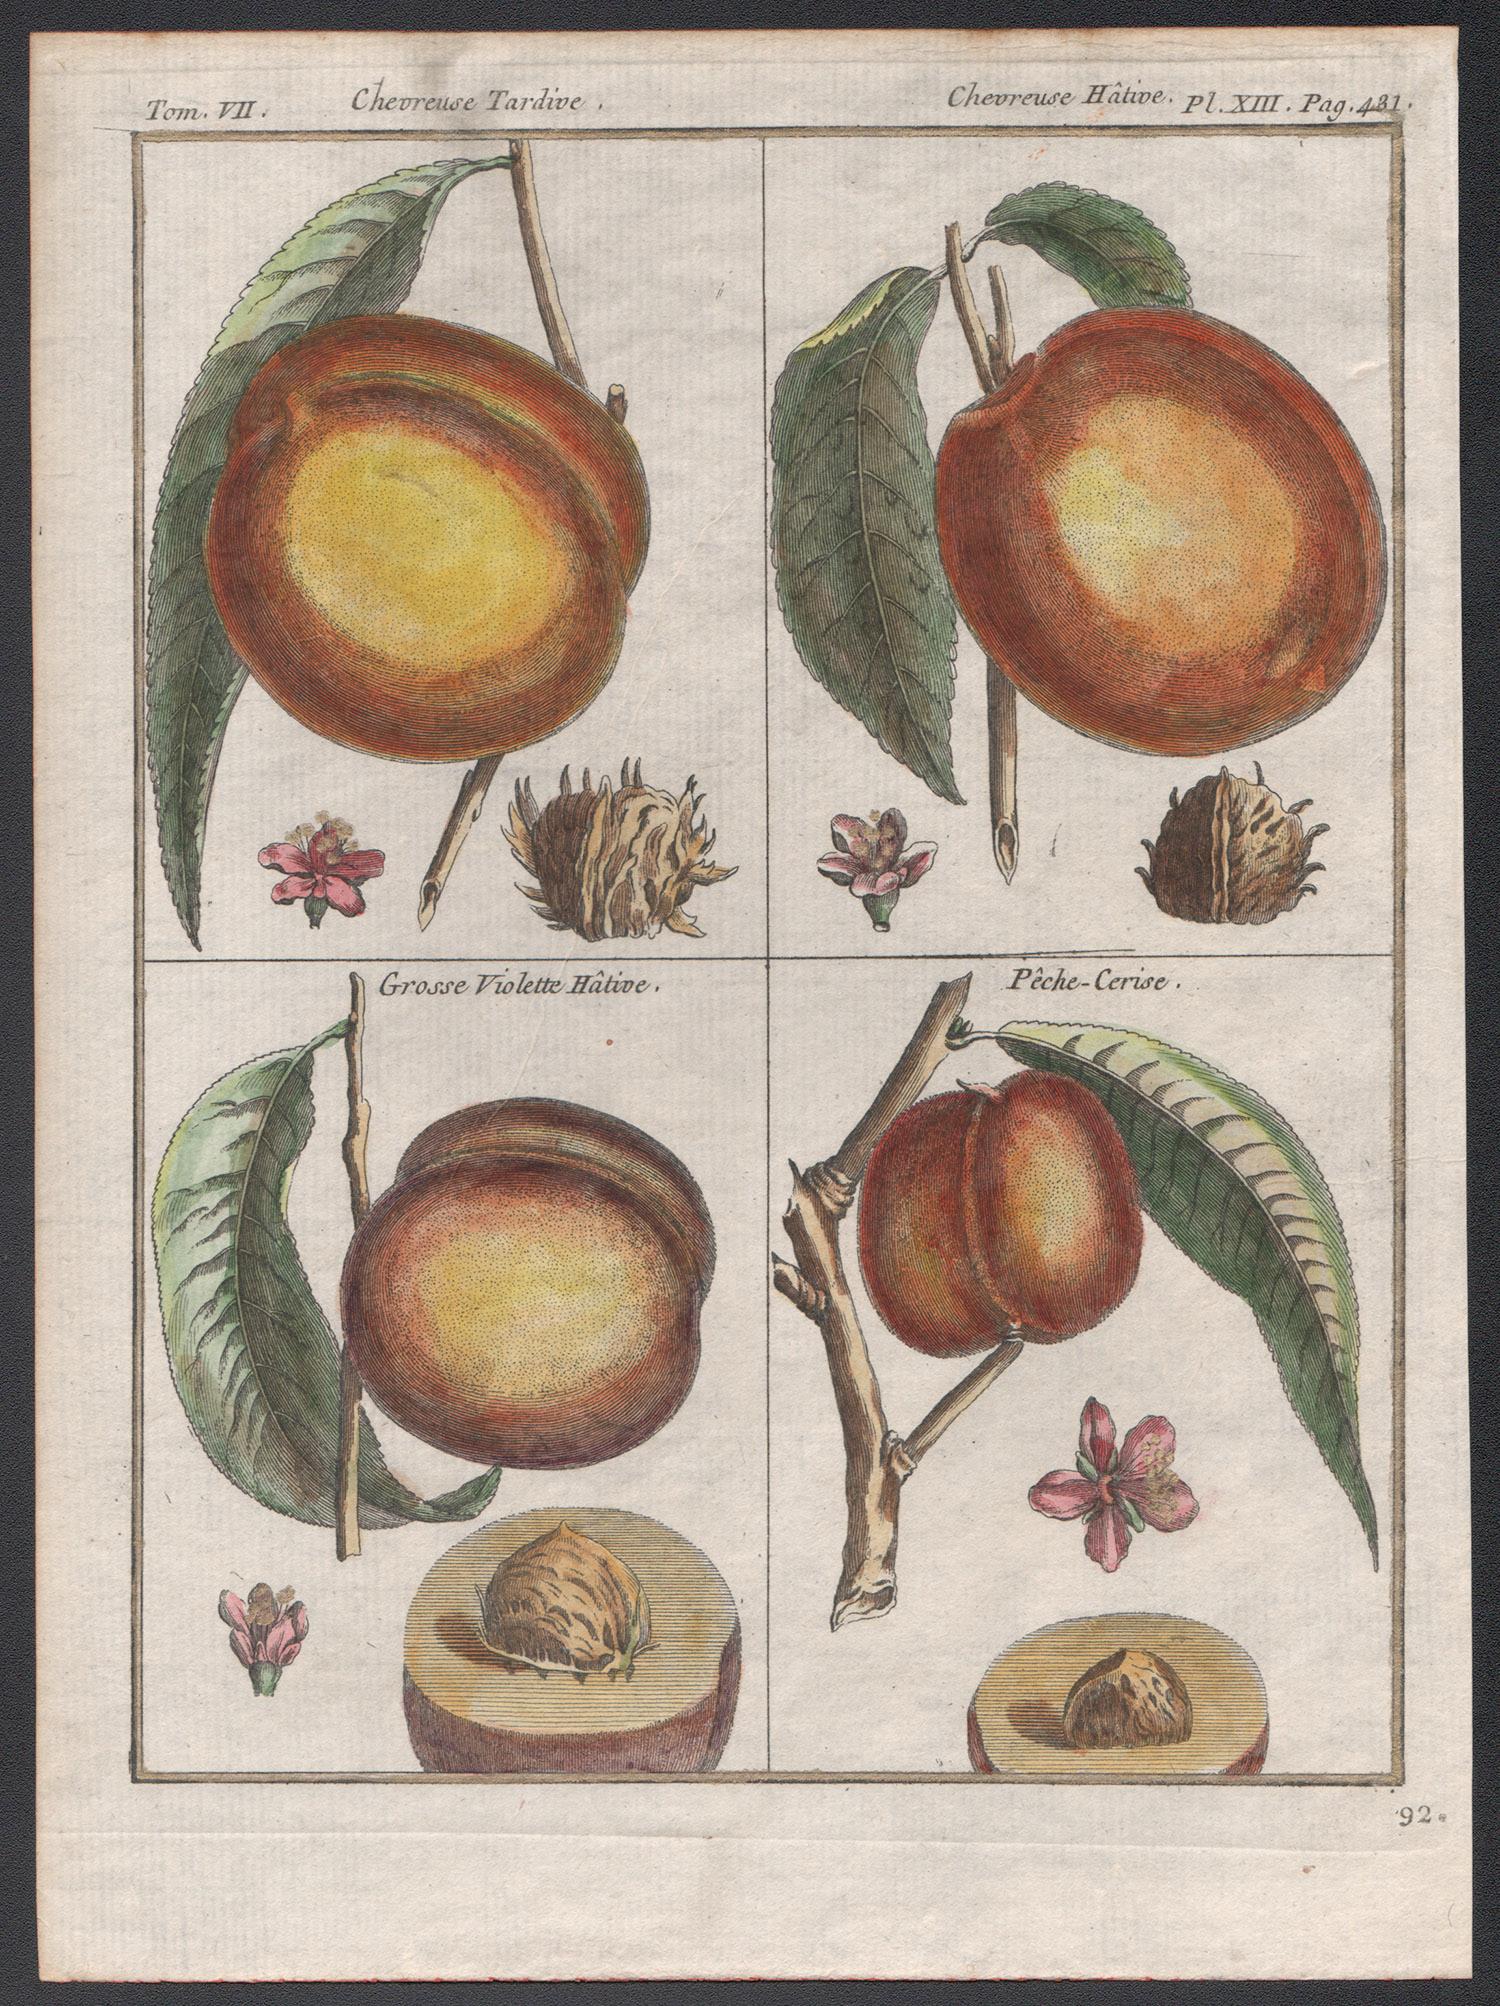 Peach varieties, fruit engraving with later hand-colouring, circa 1770